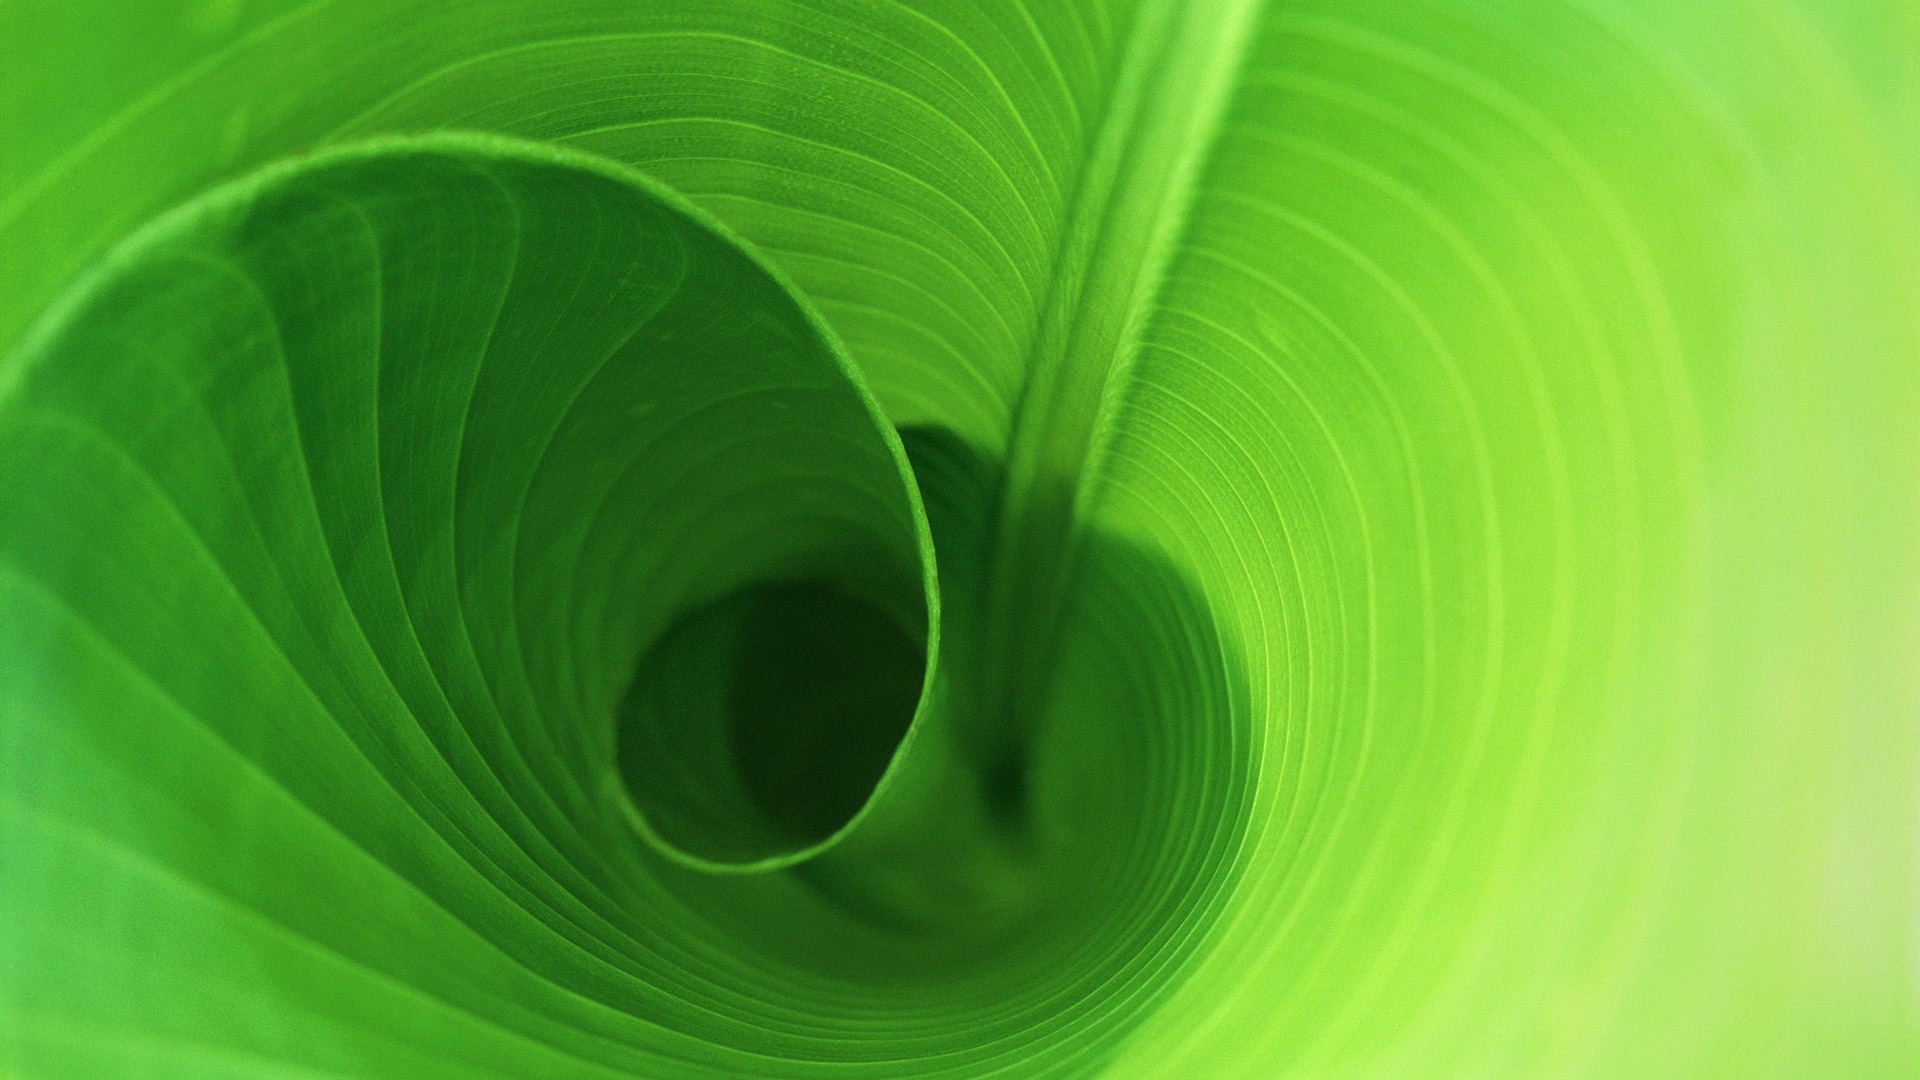 Large green leaves close-up flower wallpaper (2) #3 - 1920x1080